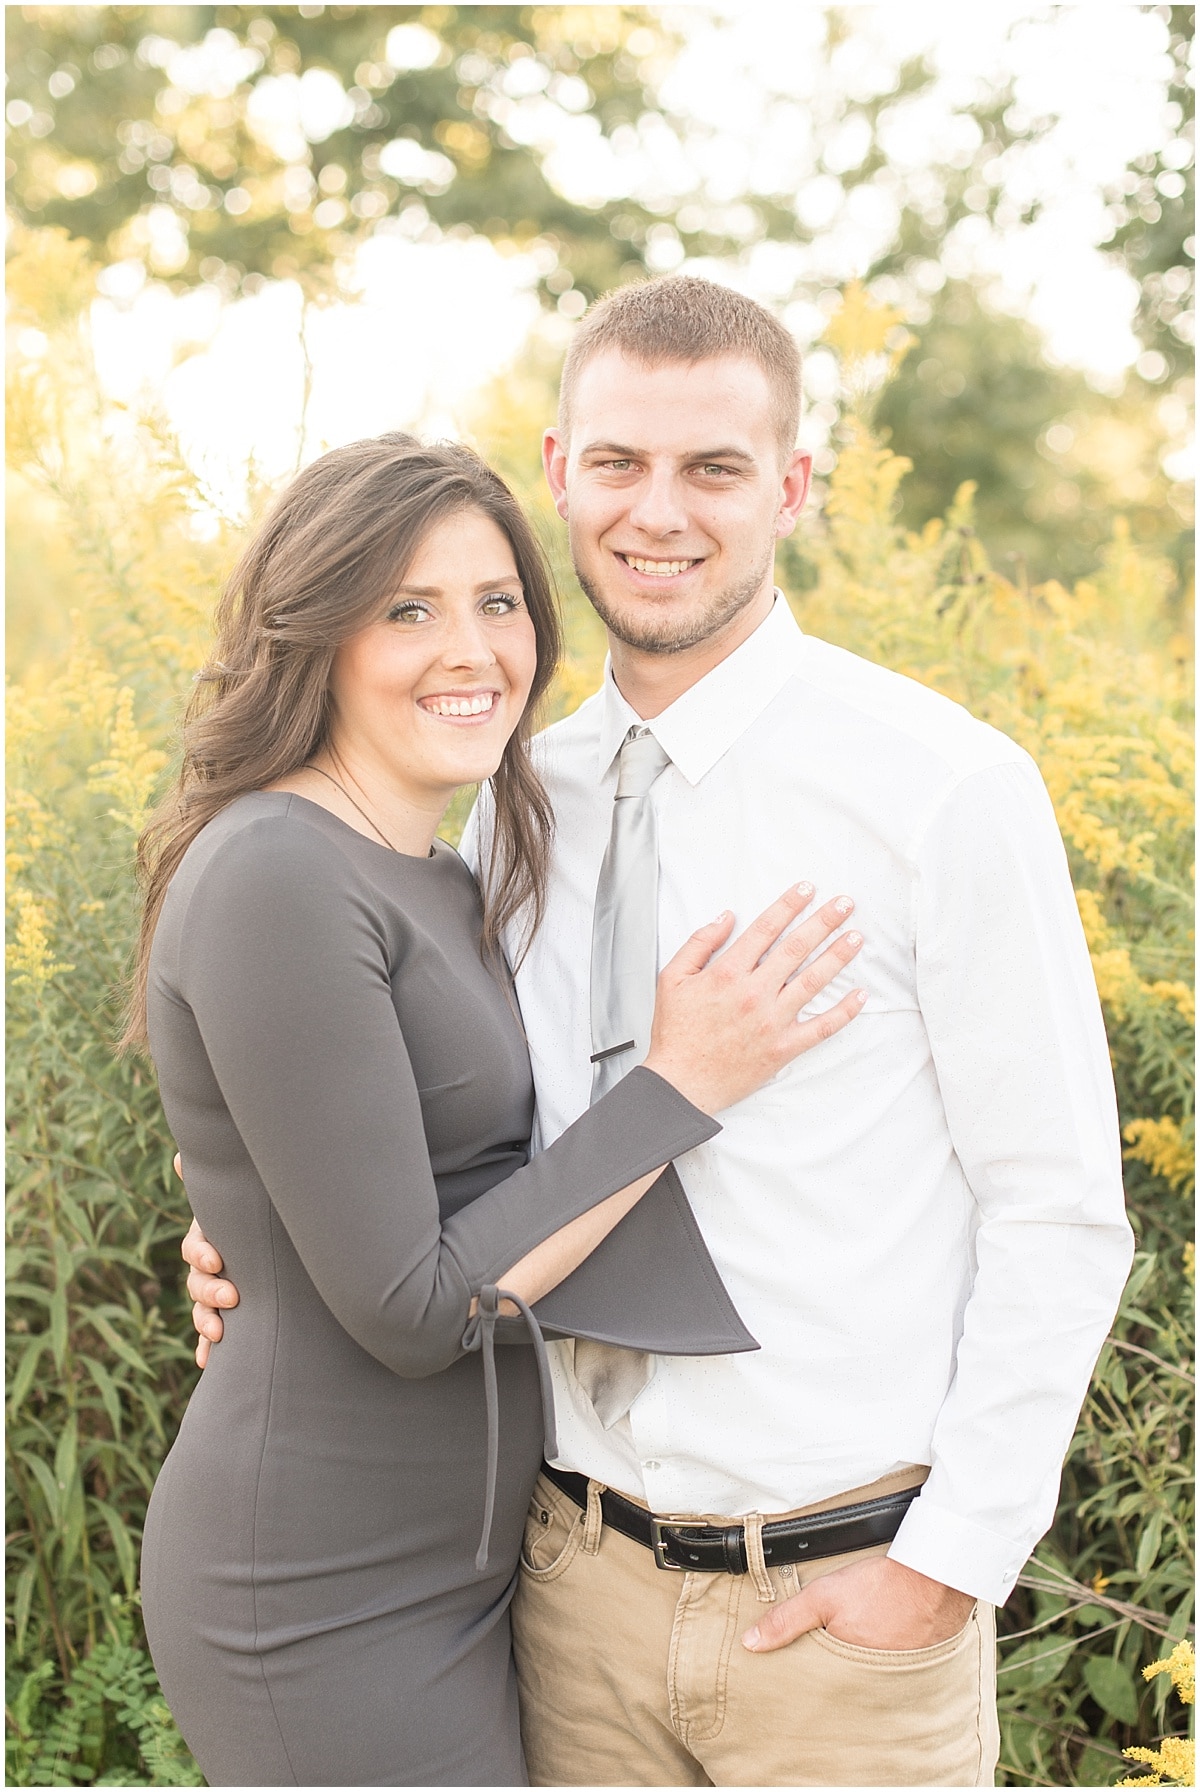 Lafayette, Indiana wedding photographer Victoria Rayburn took Celery Bog engagement photos for Kerry and Kelsey.